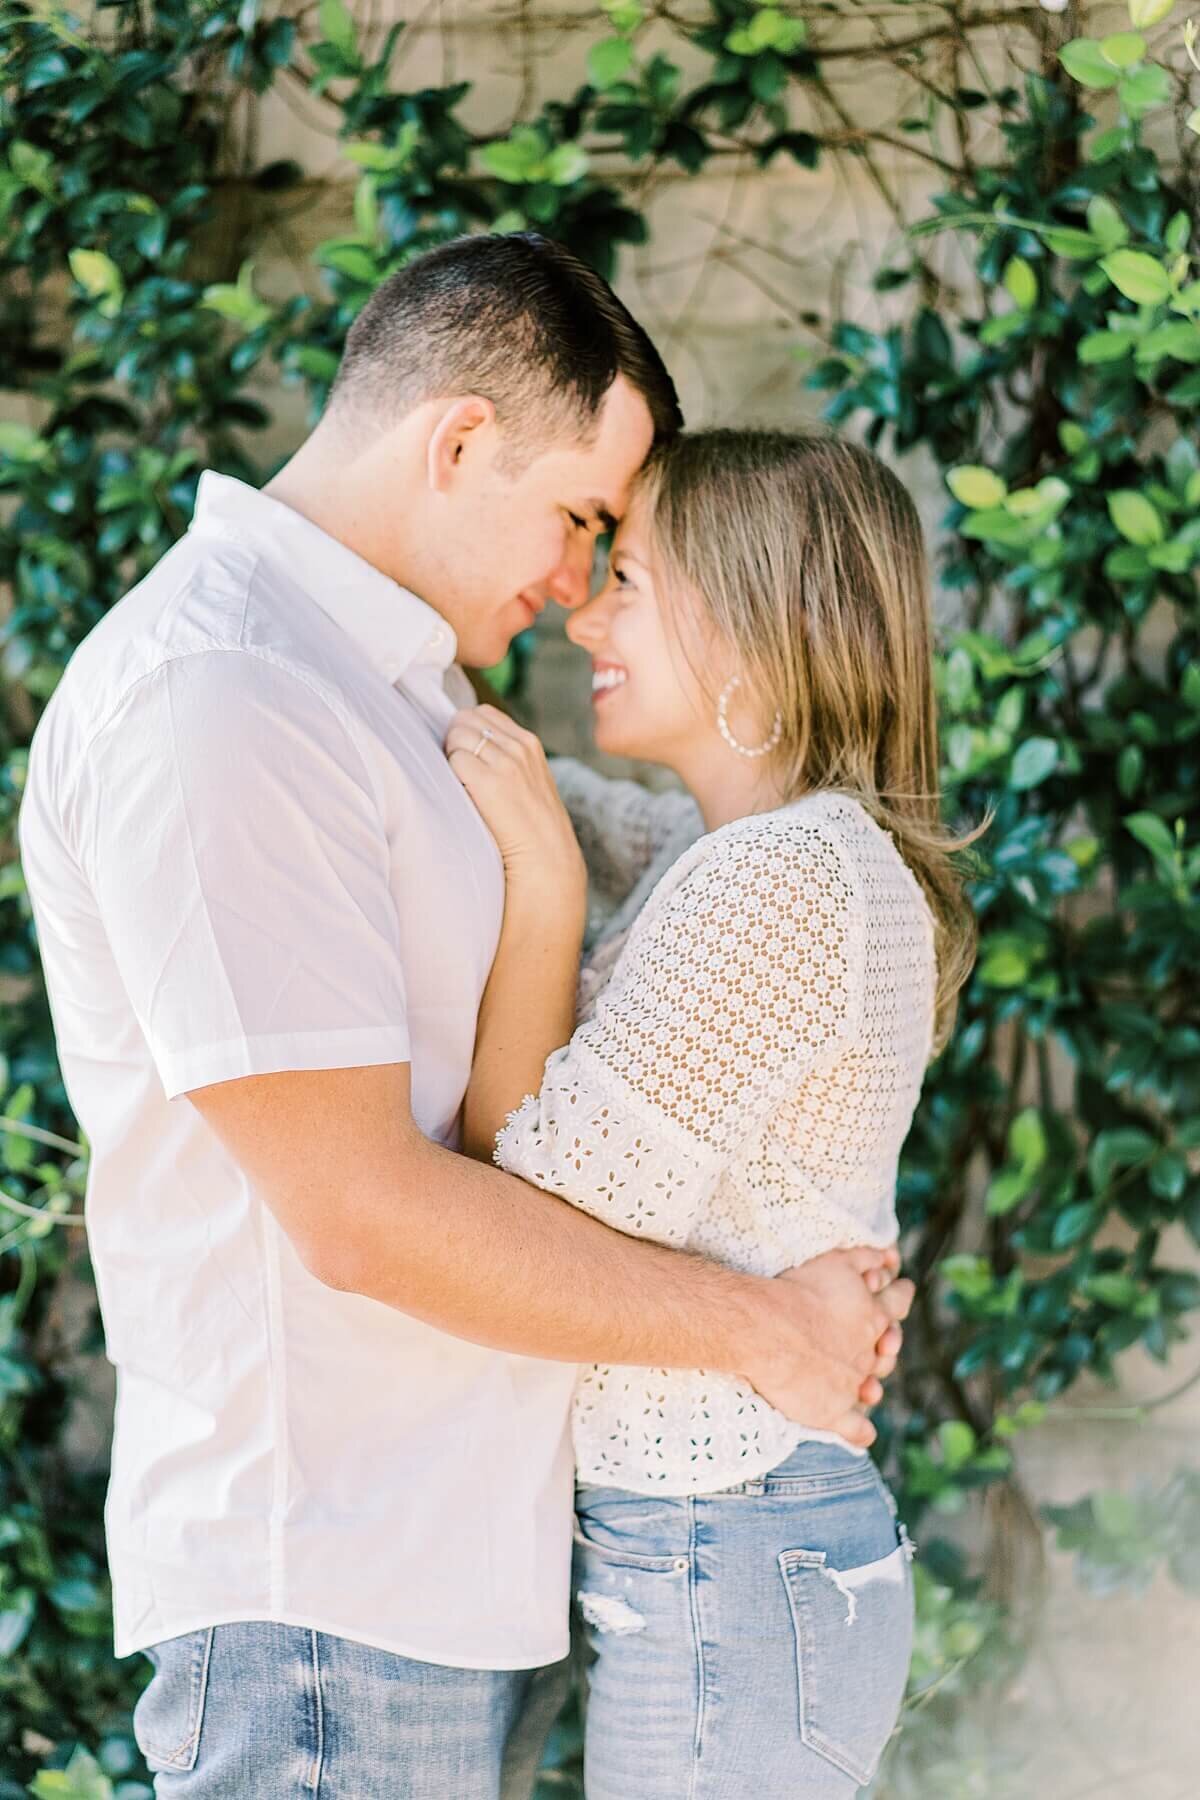 McGovern-Centennial-Gardens-Hermann-Park-Engagement-Session-Alicia-Yarrish-Photography_0026